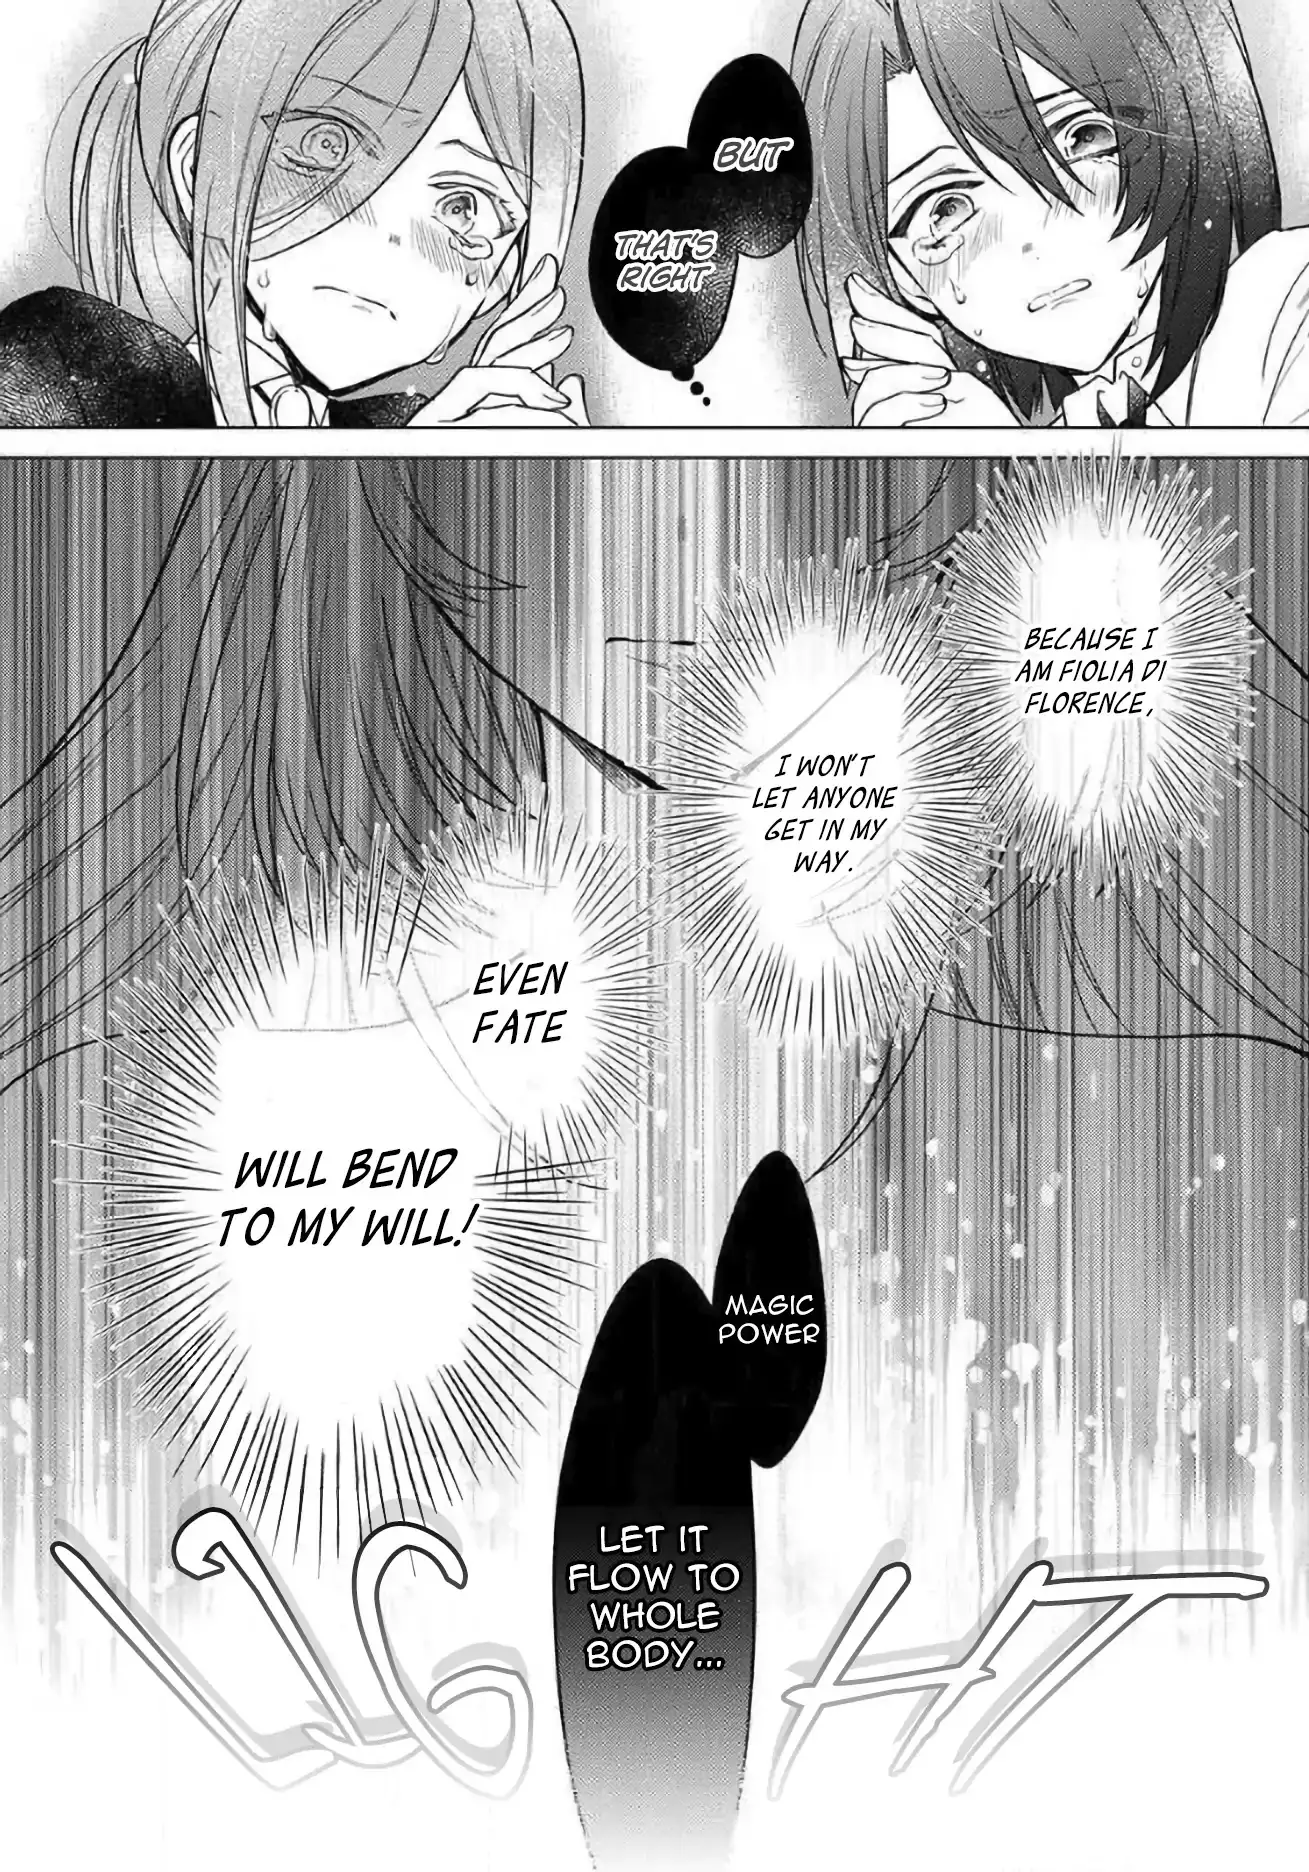 When I Woke Up, Twenty Years Passed!: The Villainous Daughter’s Afterlife - Chapter 1 Page 22